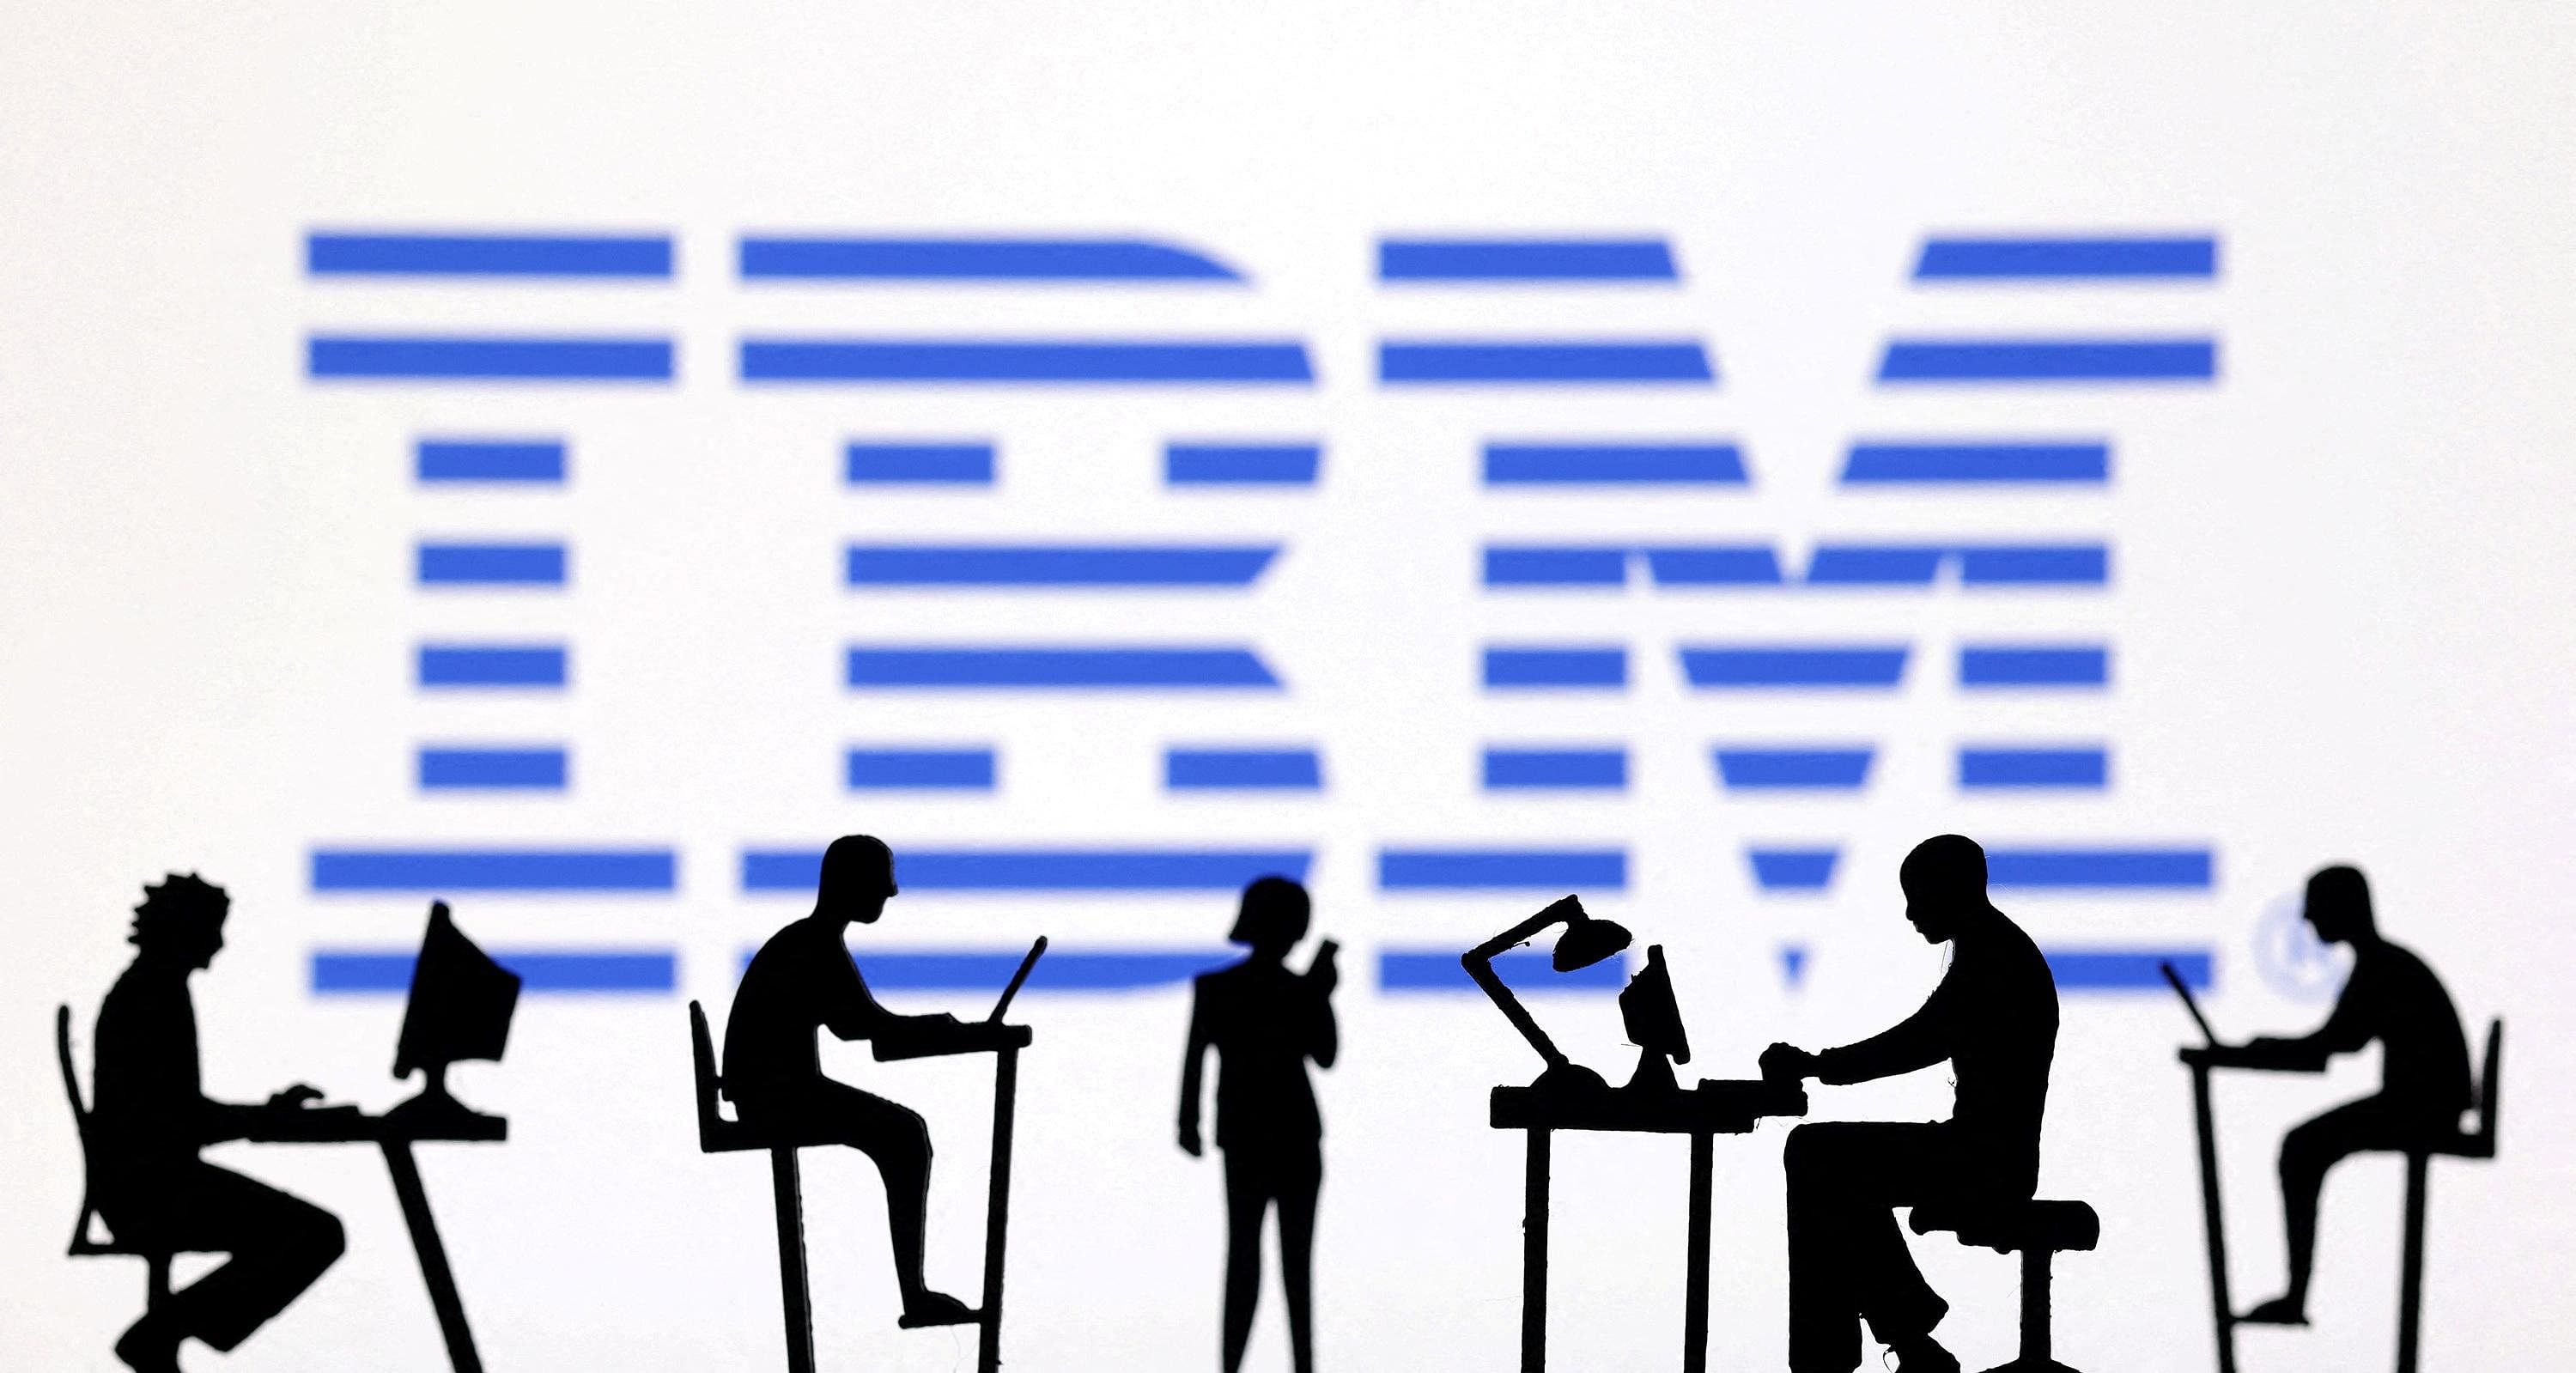 IBM falls on weak consulting sales, overshadowing HashiCorp deal